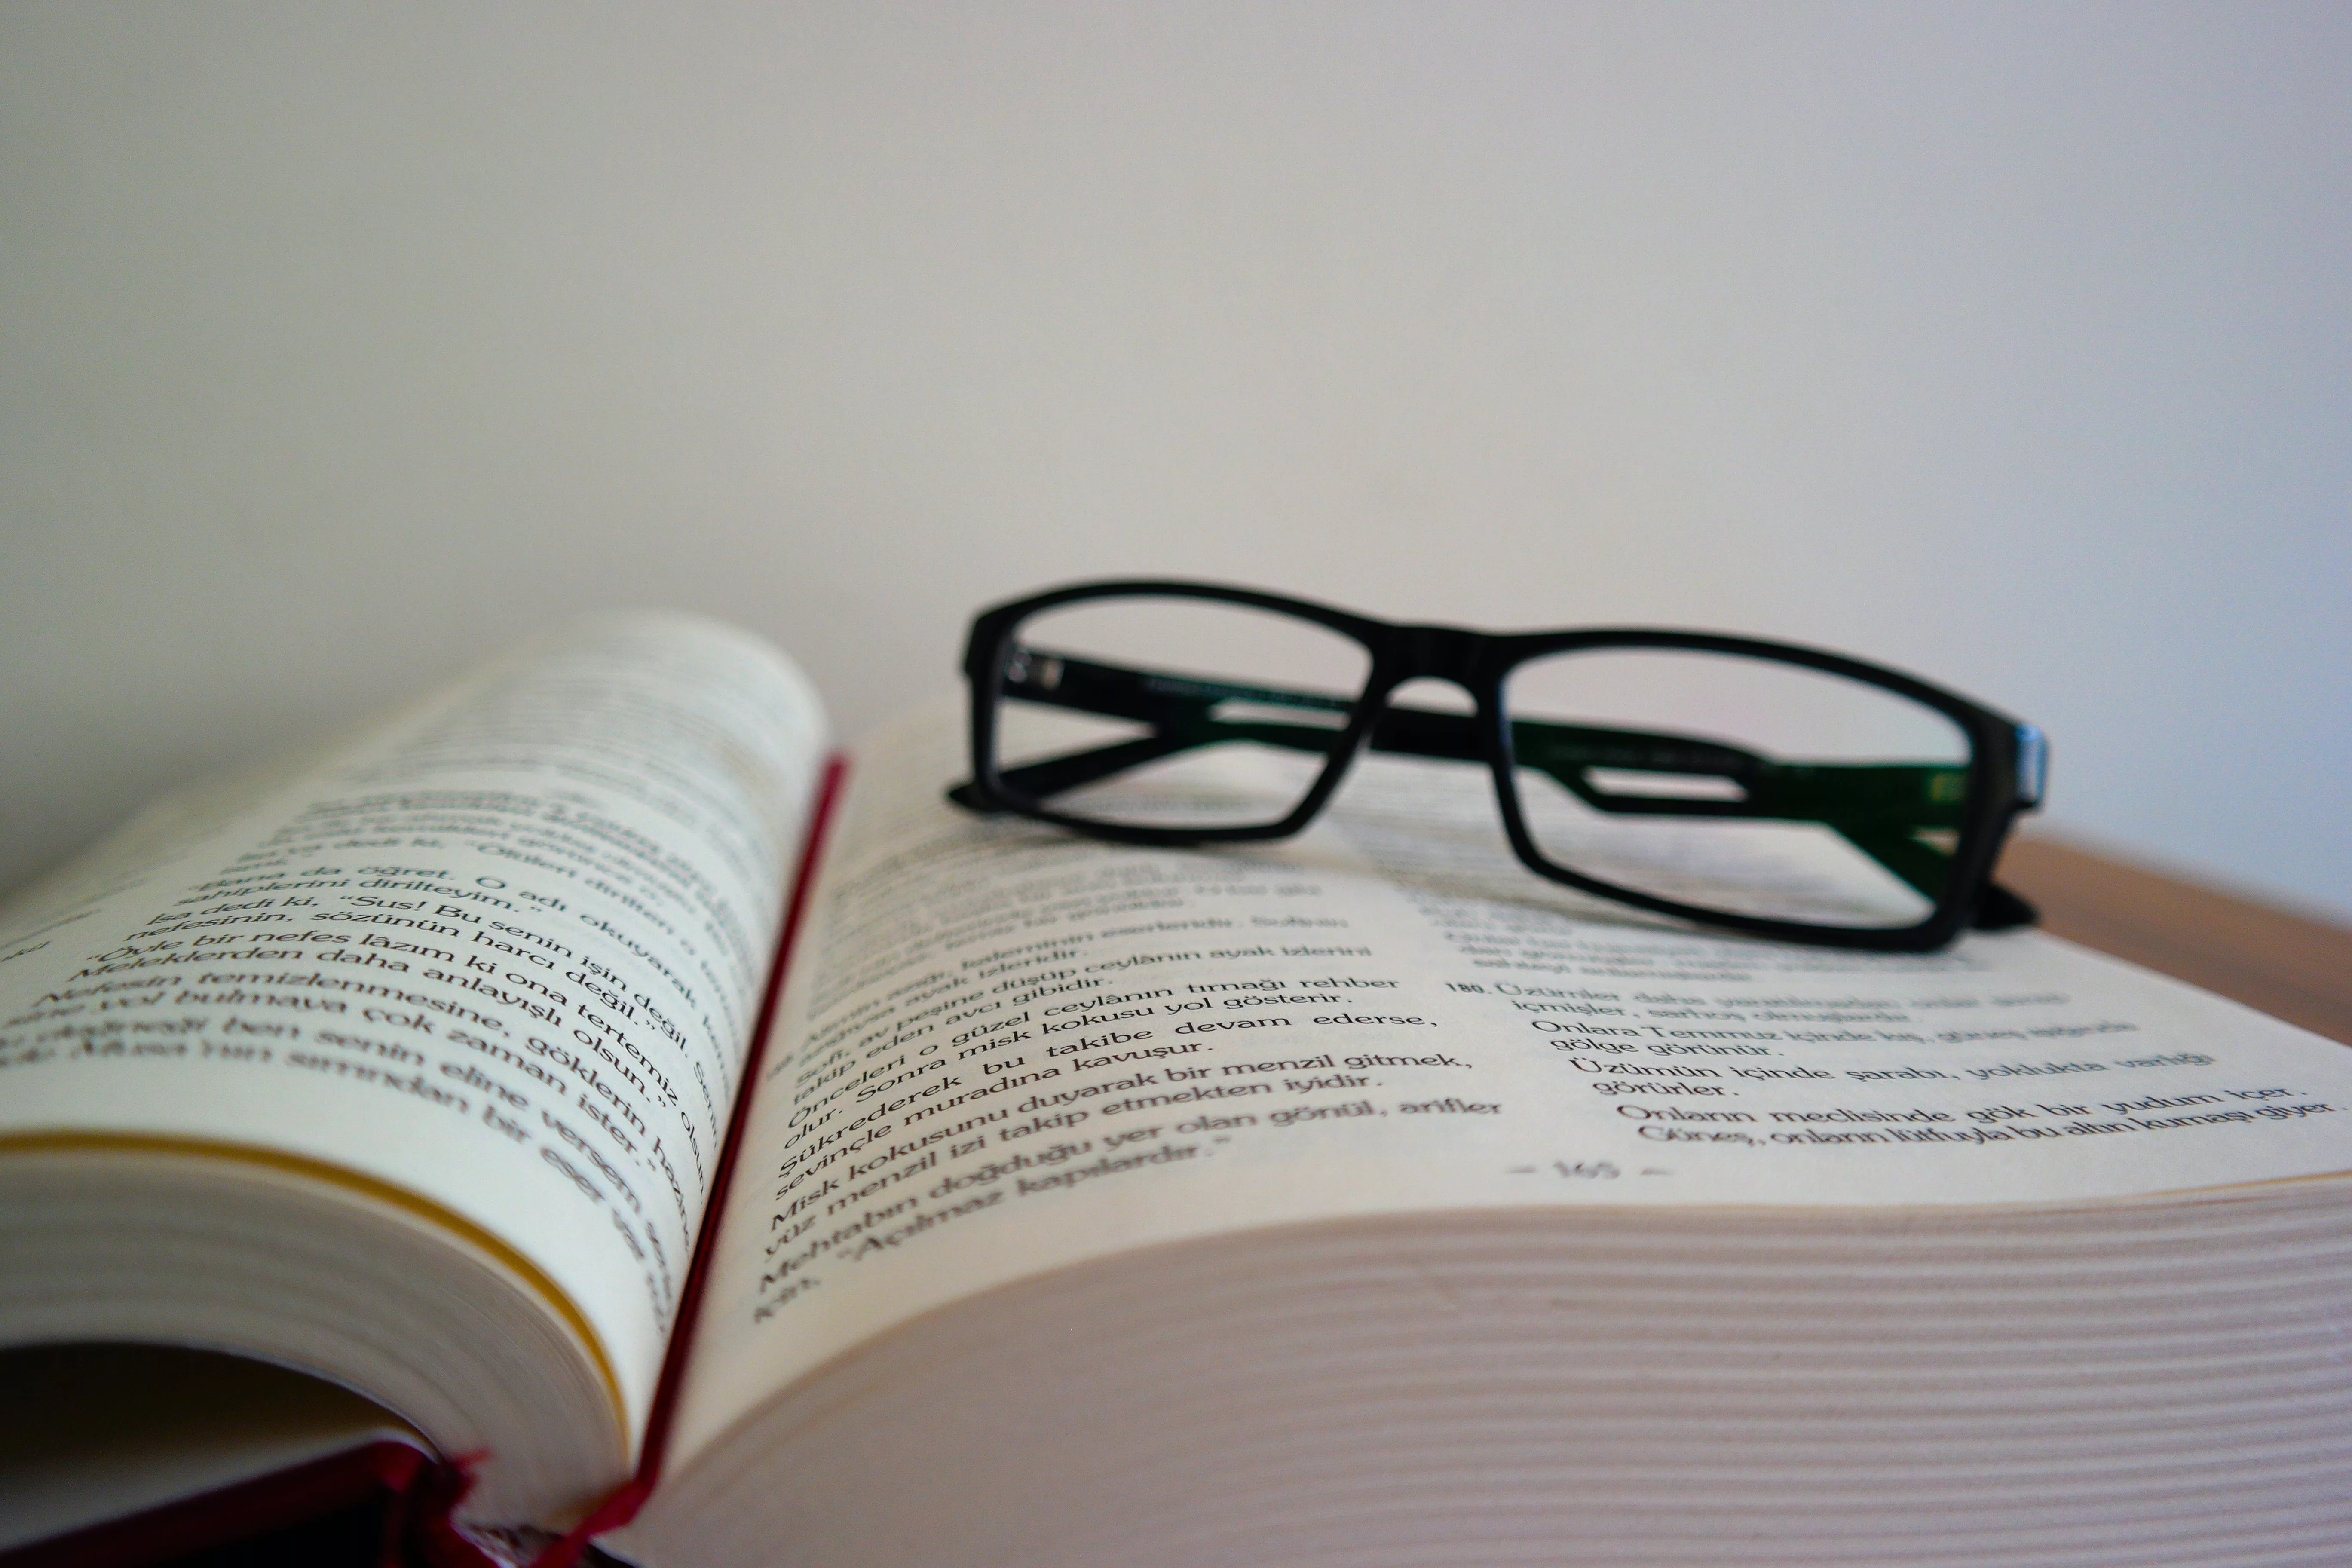 A pair of reading glasses sitting on an open book